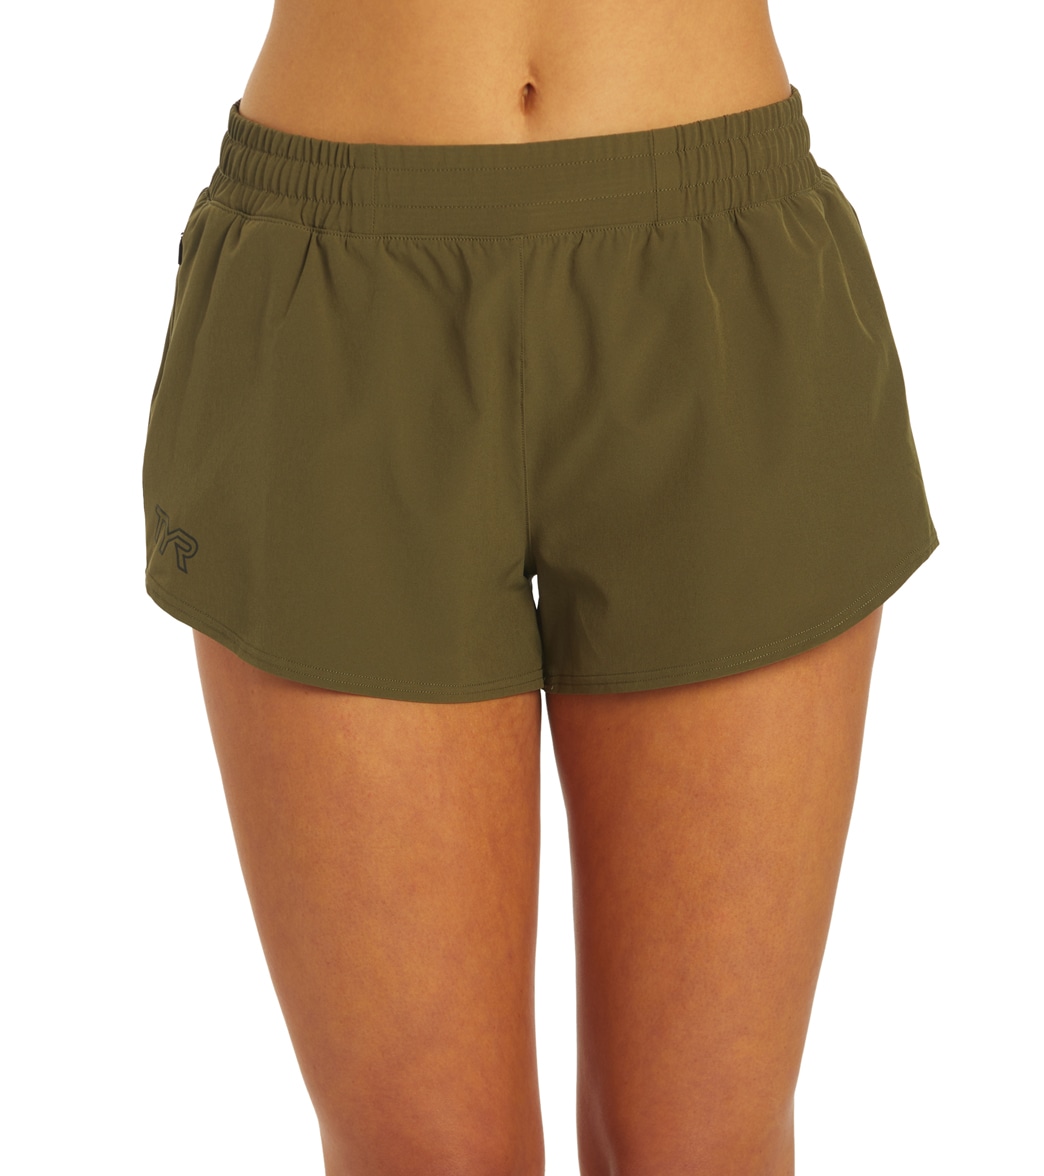 TYR Women's Pace Running Short - Olive Night Large - Swimoutlet.com